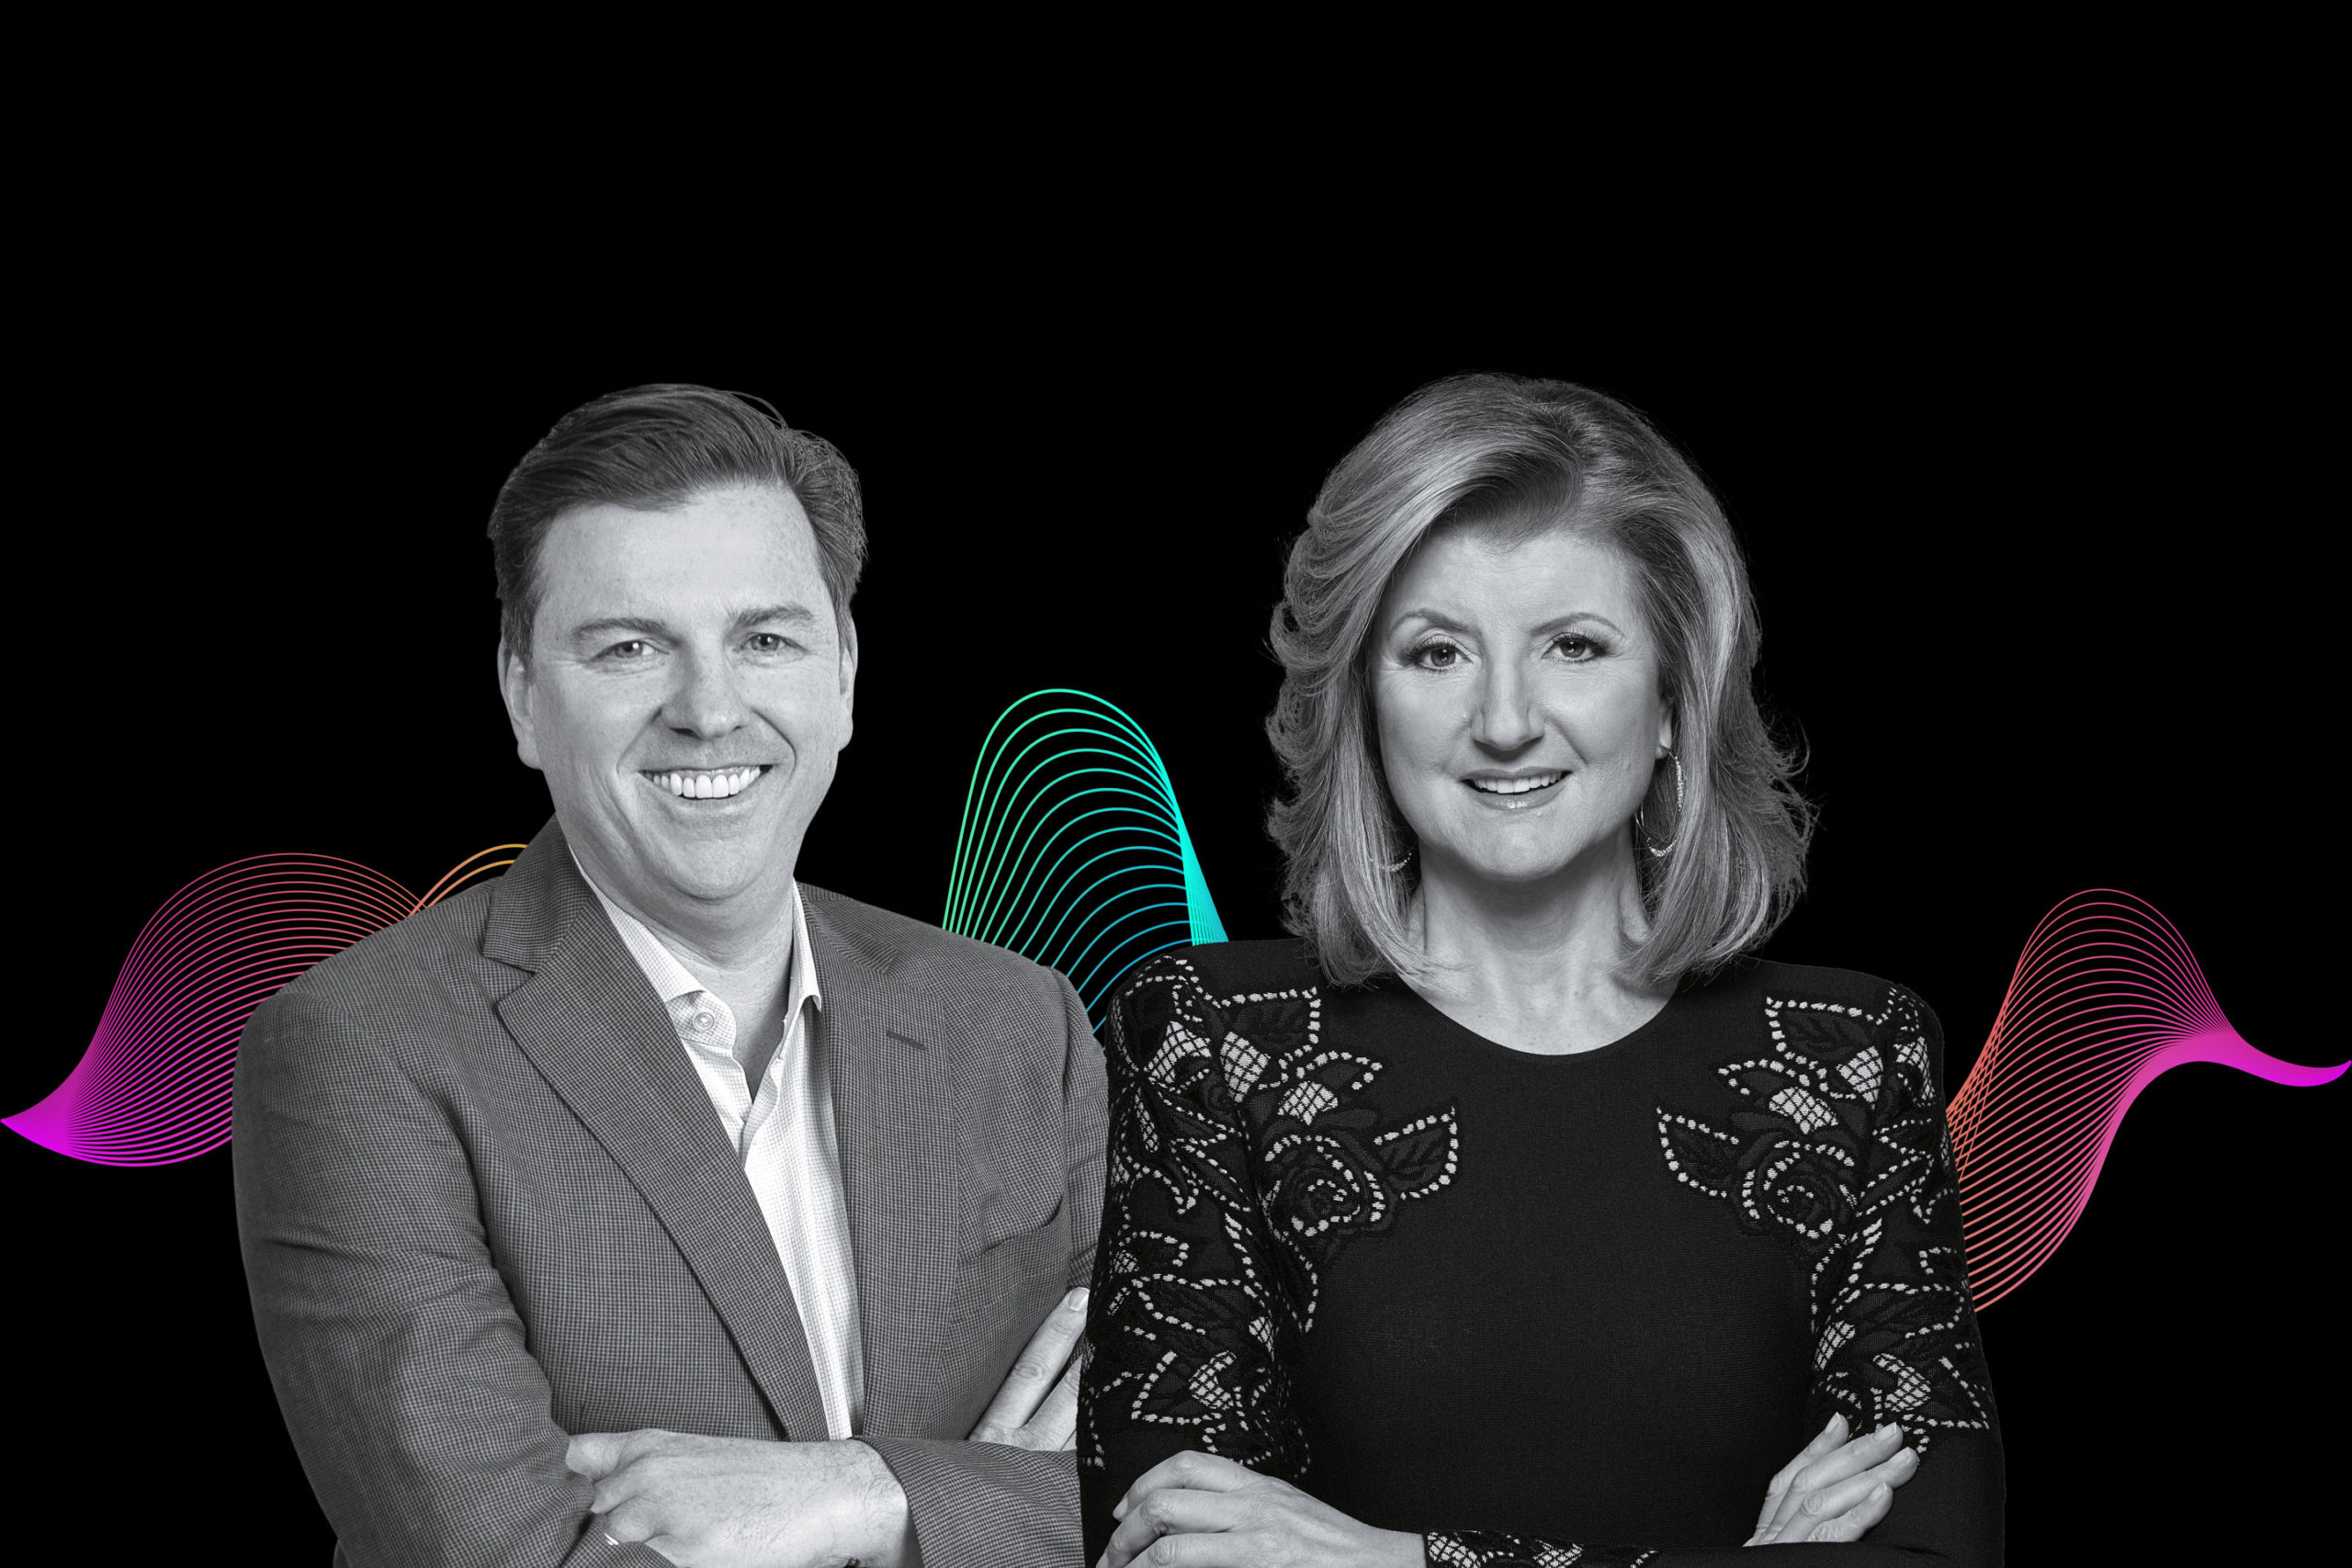 Arianna Huffington’s Thrive teams up with Genesys to offer reset moments amid stressful times